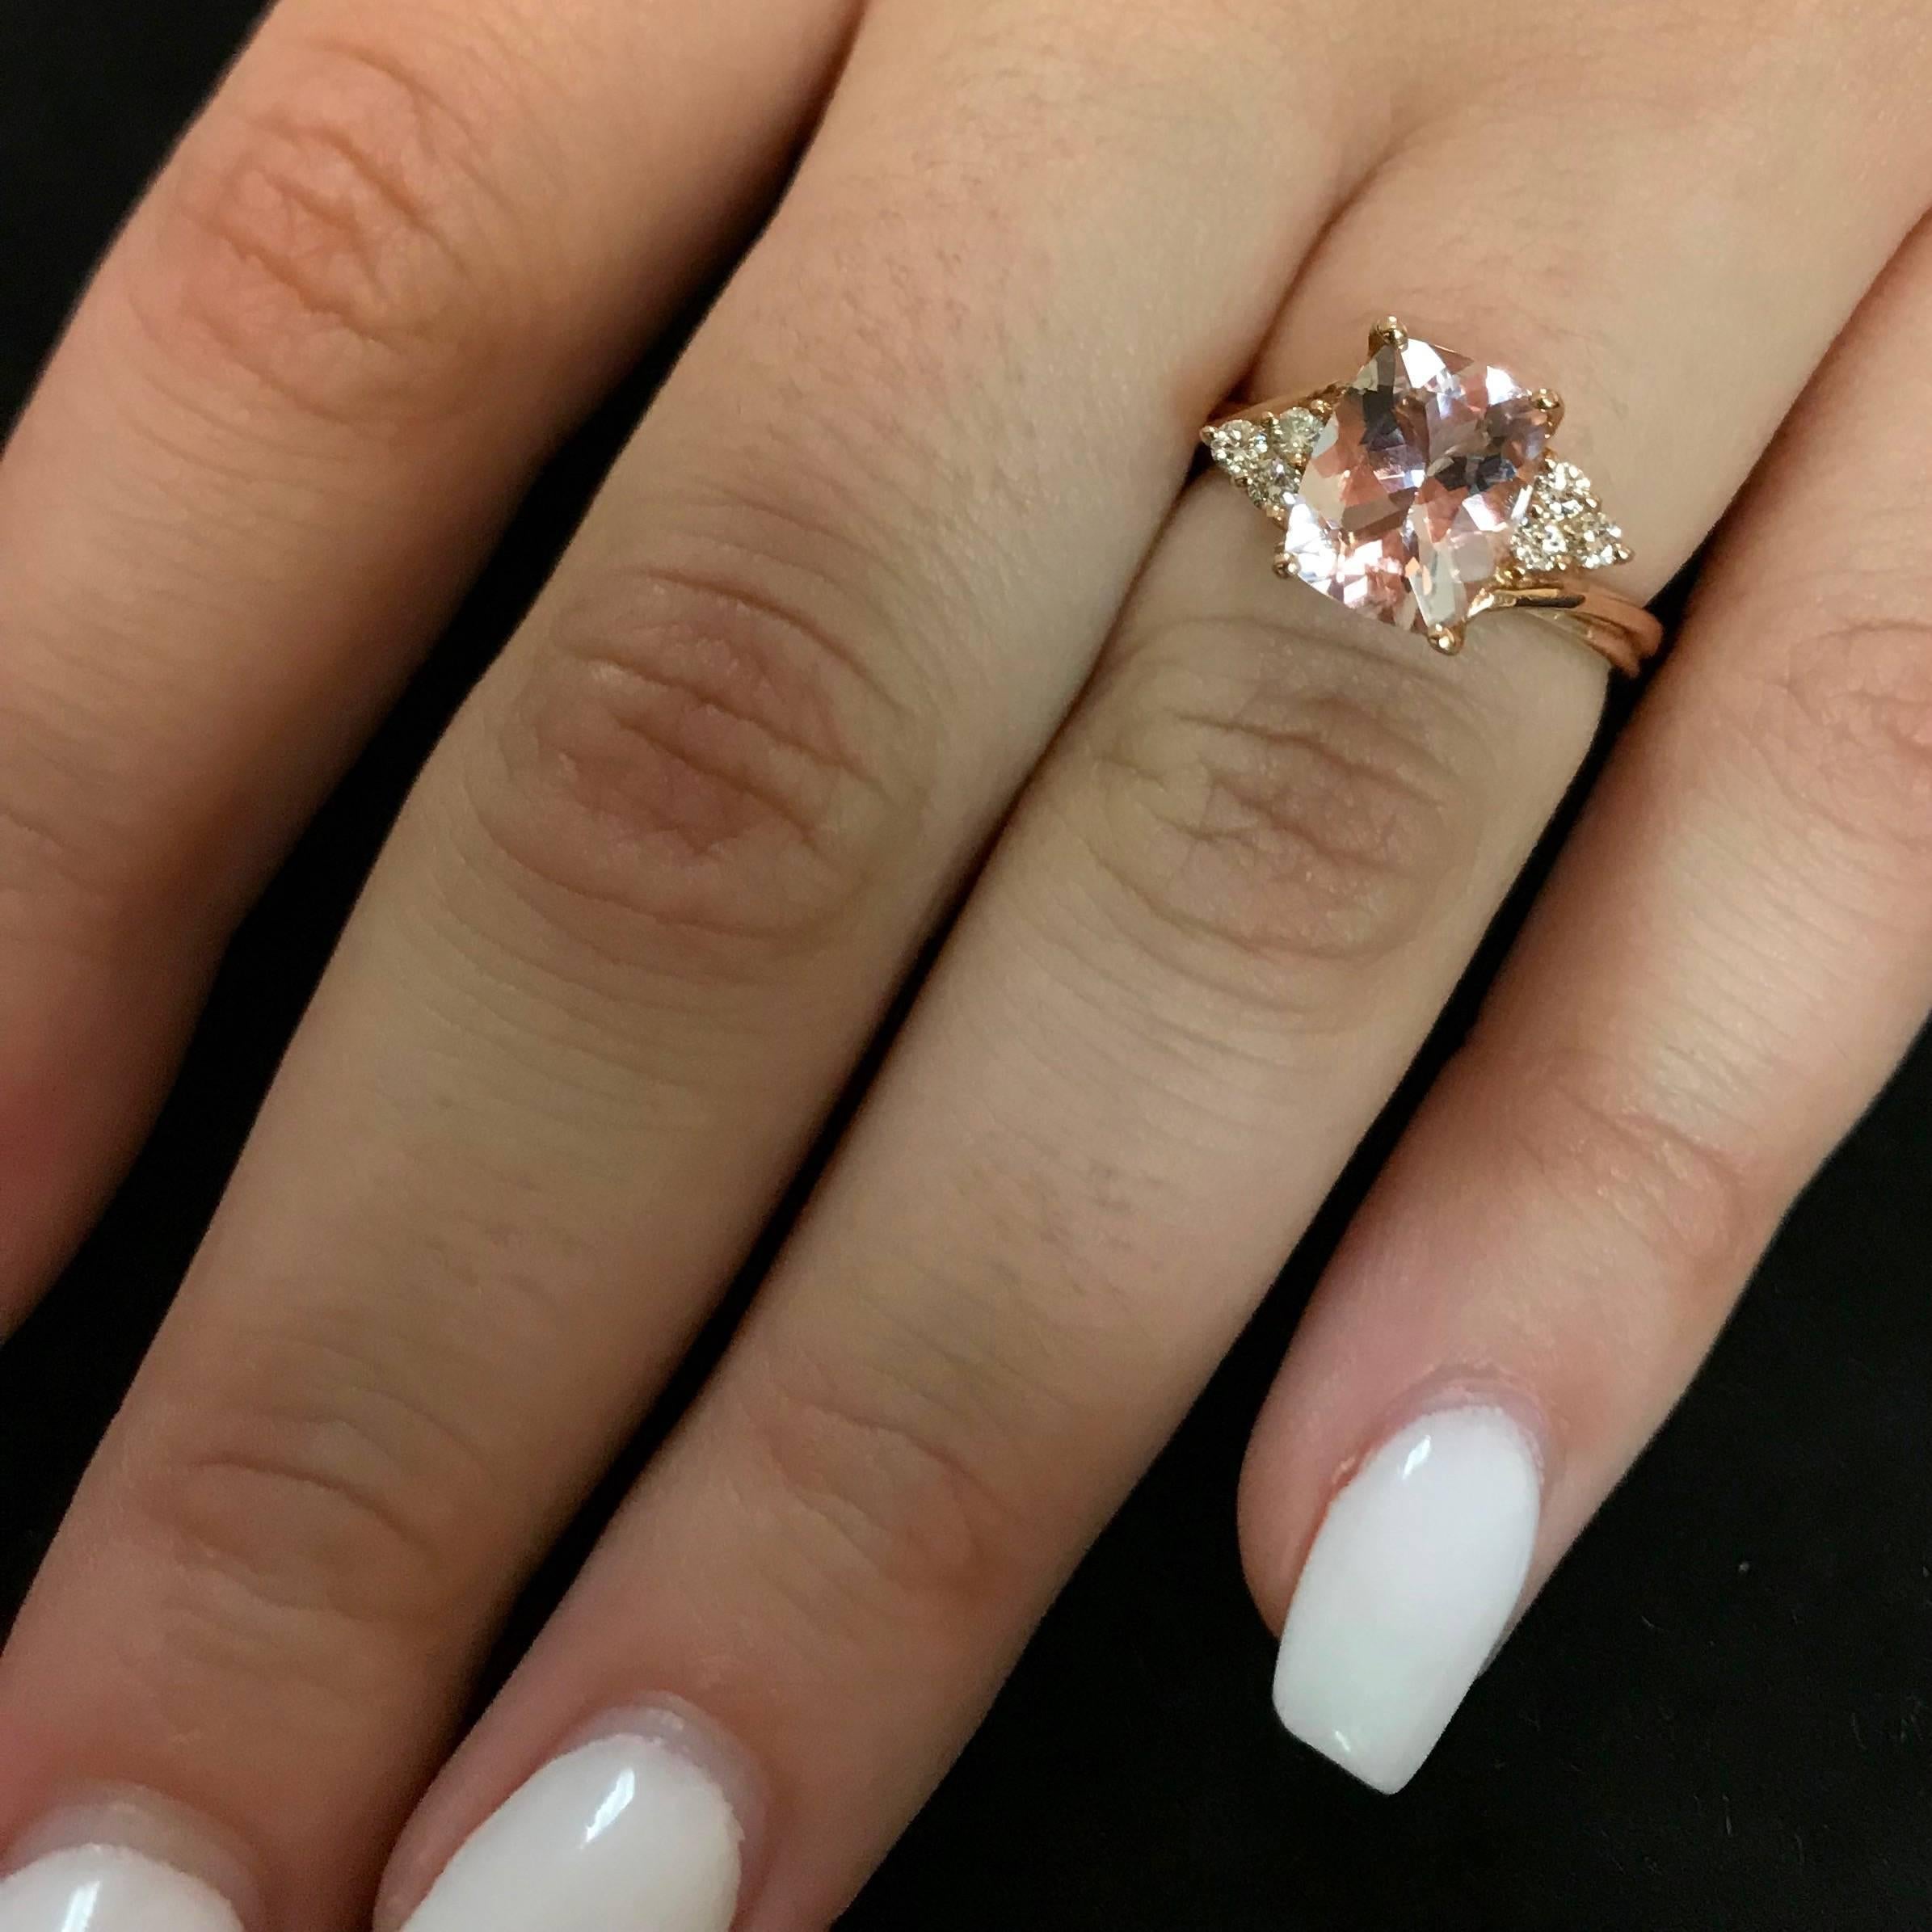 Material: 14k Rose Gold 
Center Stone Details: 1.9 Carat Cushion Cut Morganite 6.7 x 8.7 mm
Mounting Diamond Details: 6 Round White Diamonds Approximately 0.15 Carats - Clarity: SI1-SI2 / Color: H-I
Ring Size: Size 6.5. Alberto offers complimentary